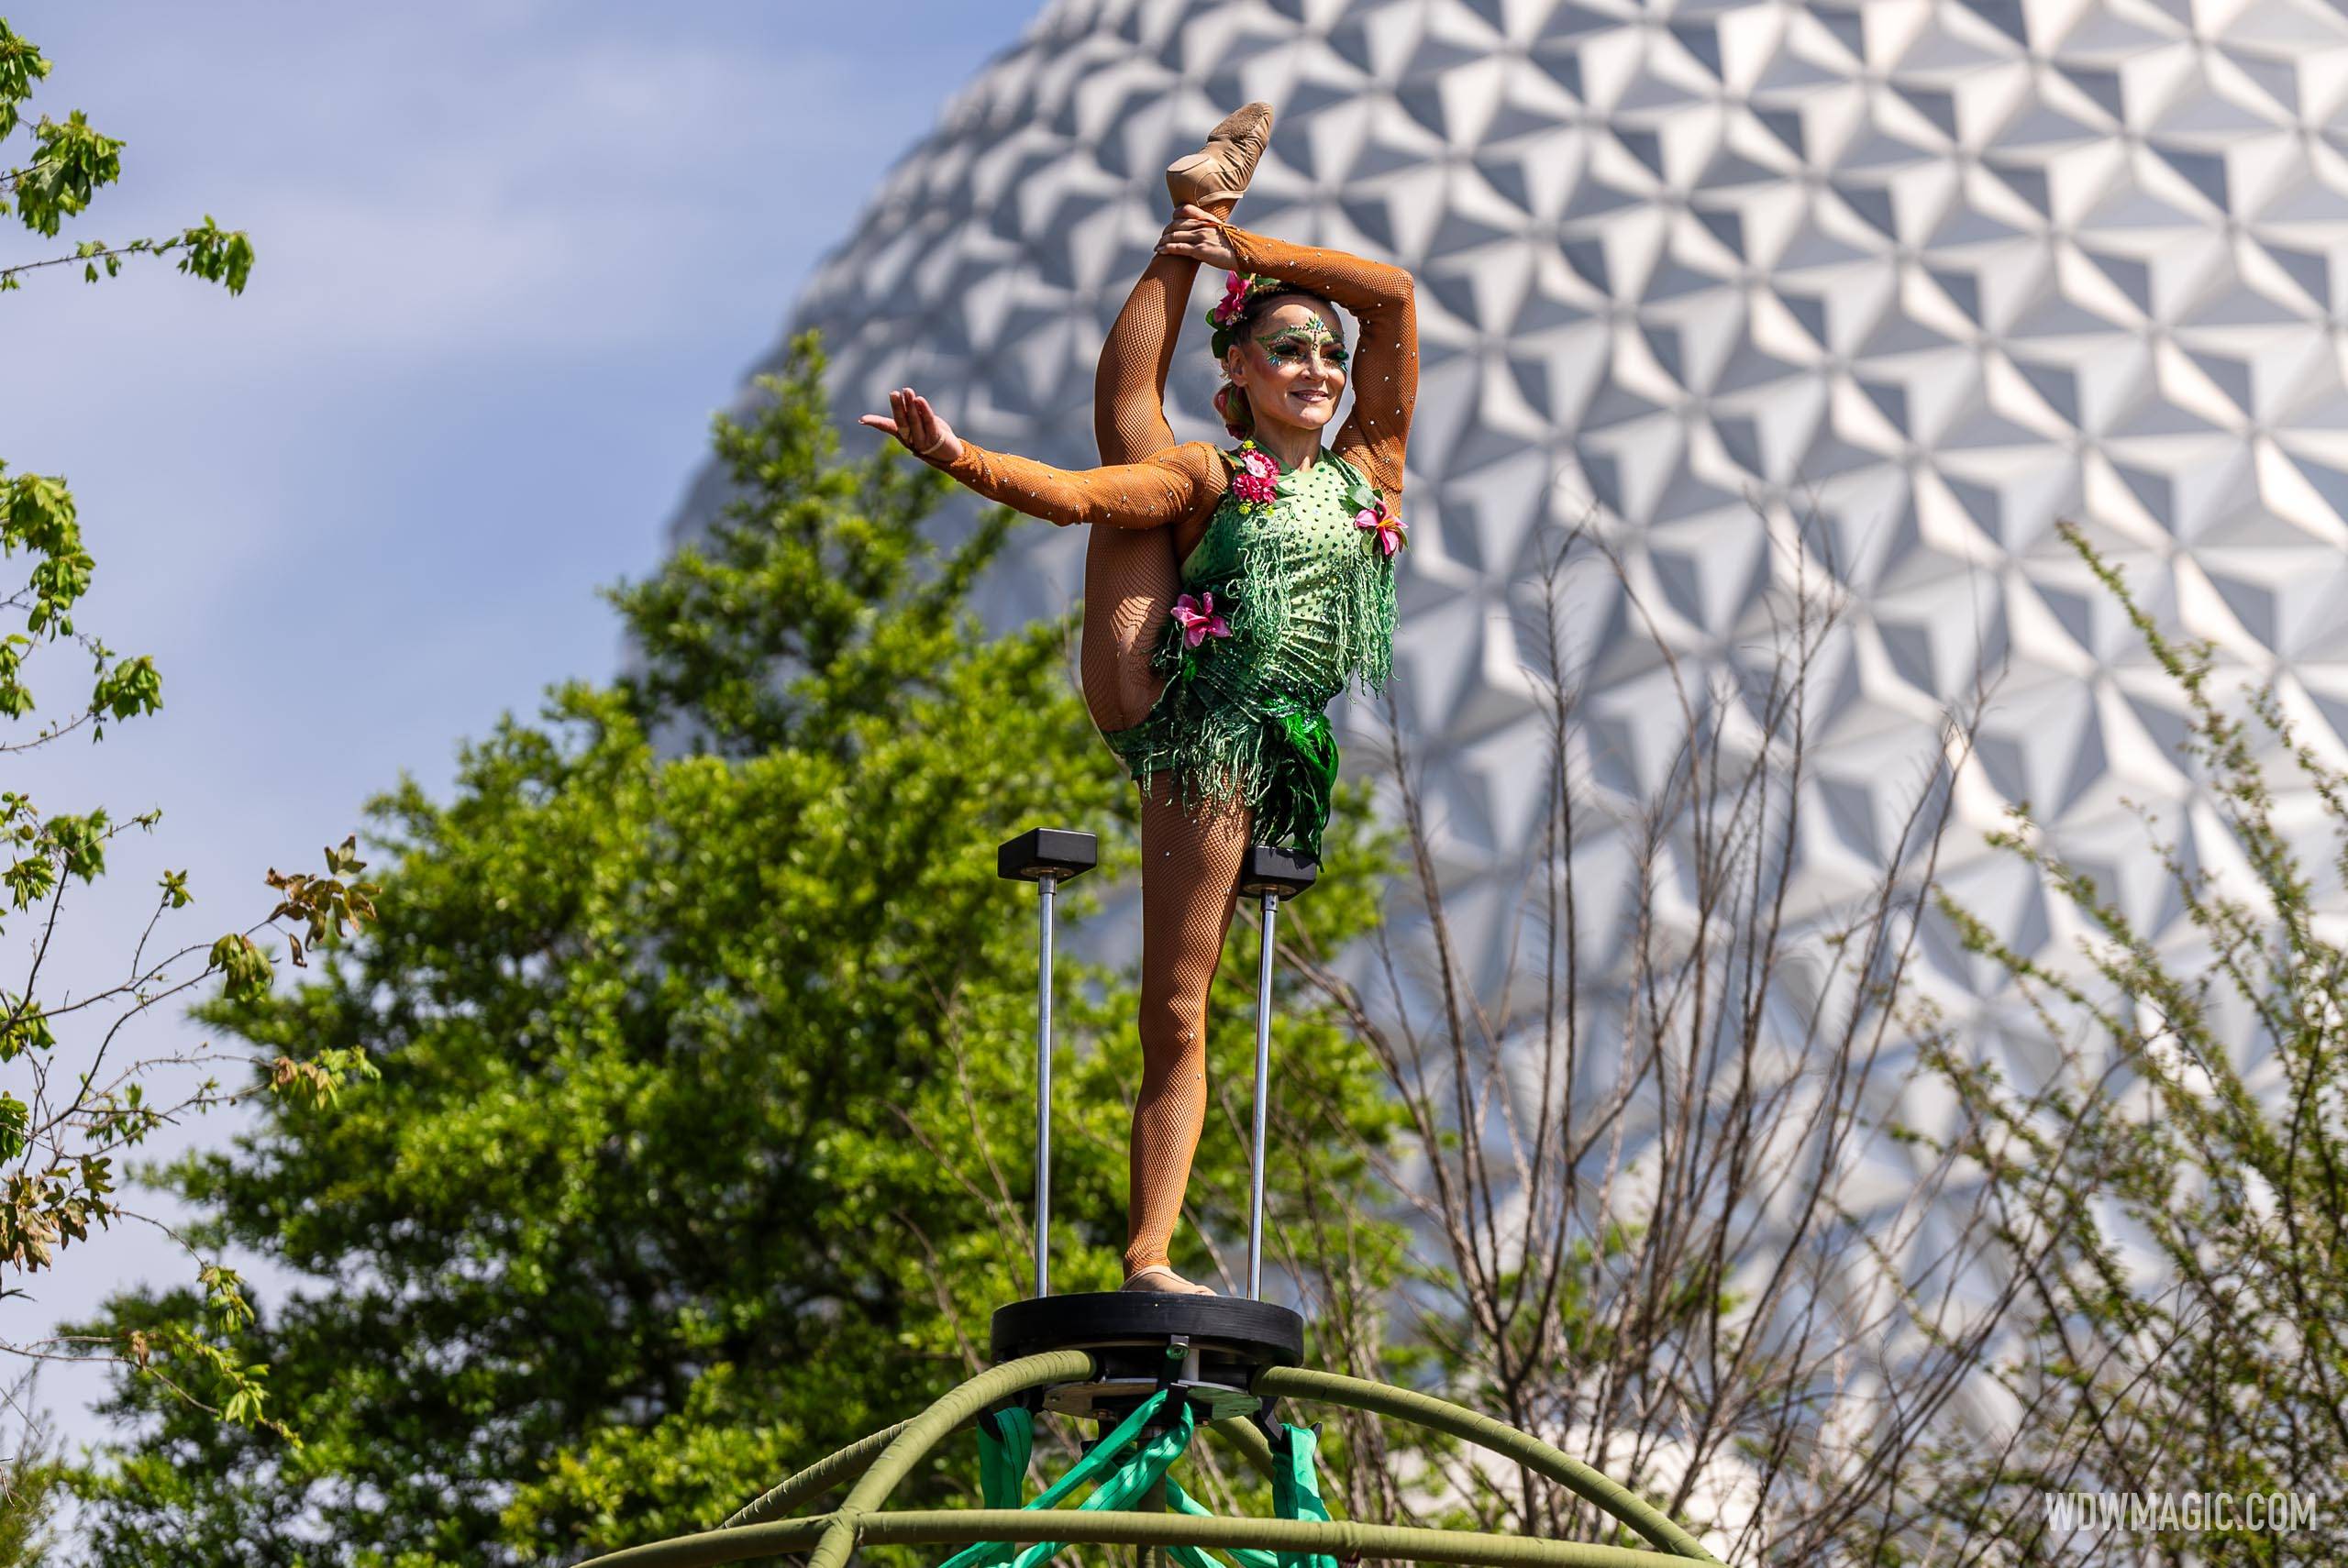 New 'Forces of Nature' acrobatic show debuts at EPCOT